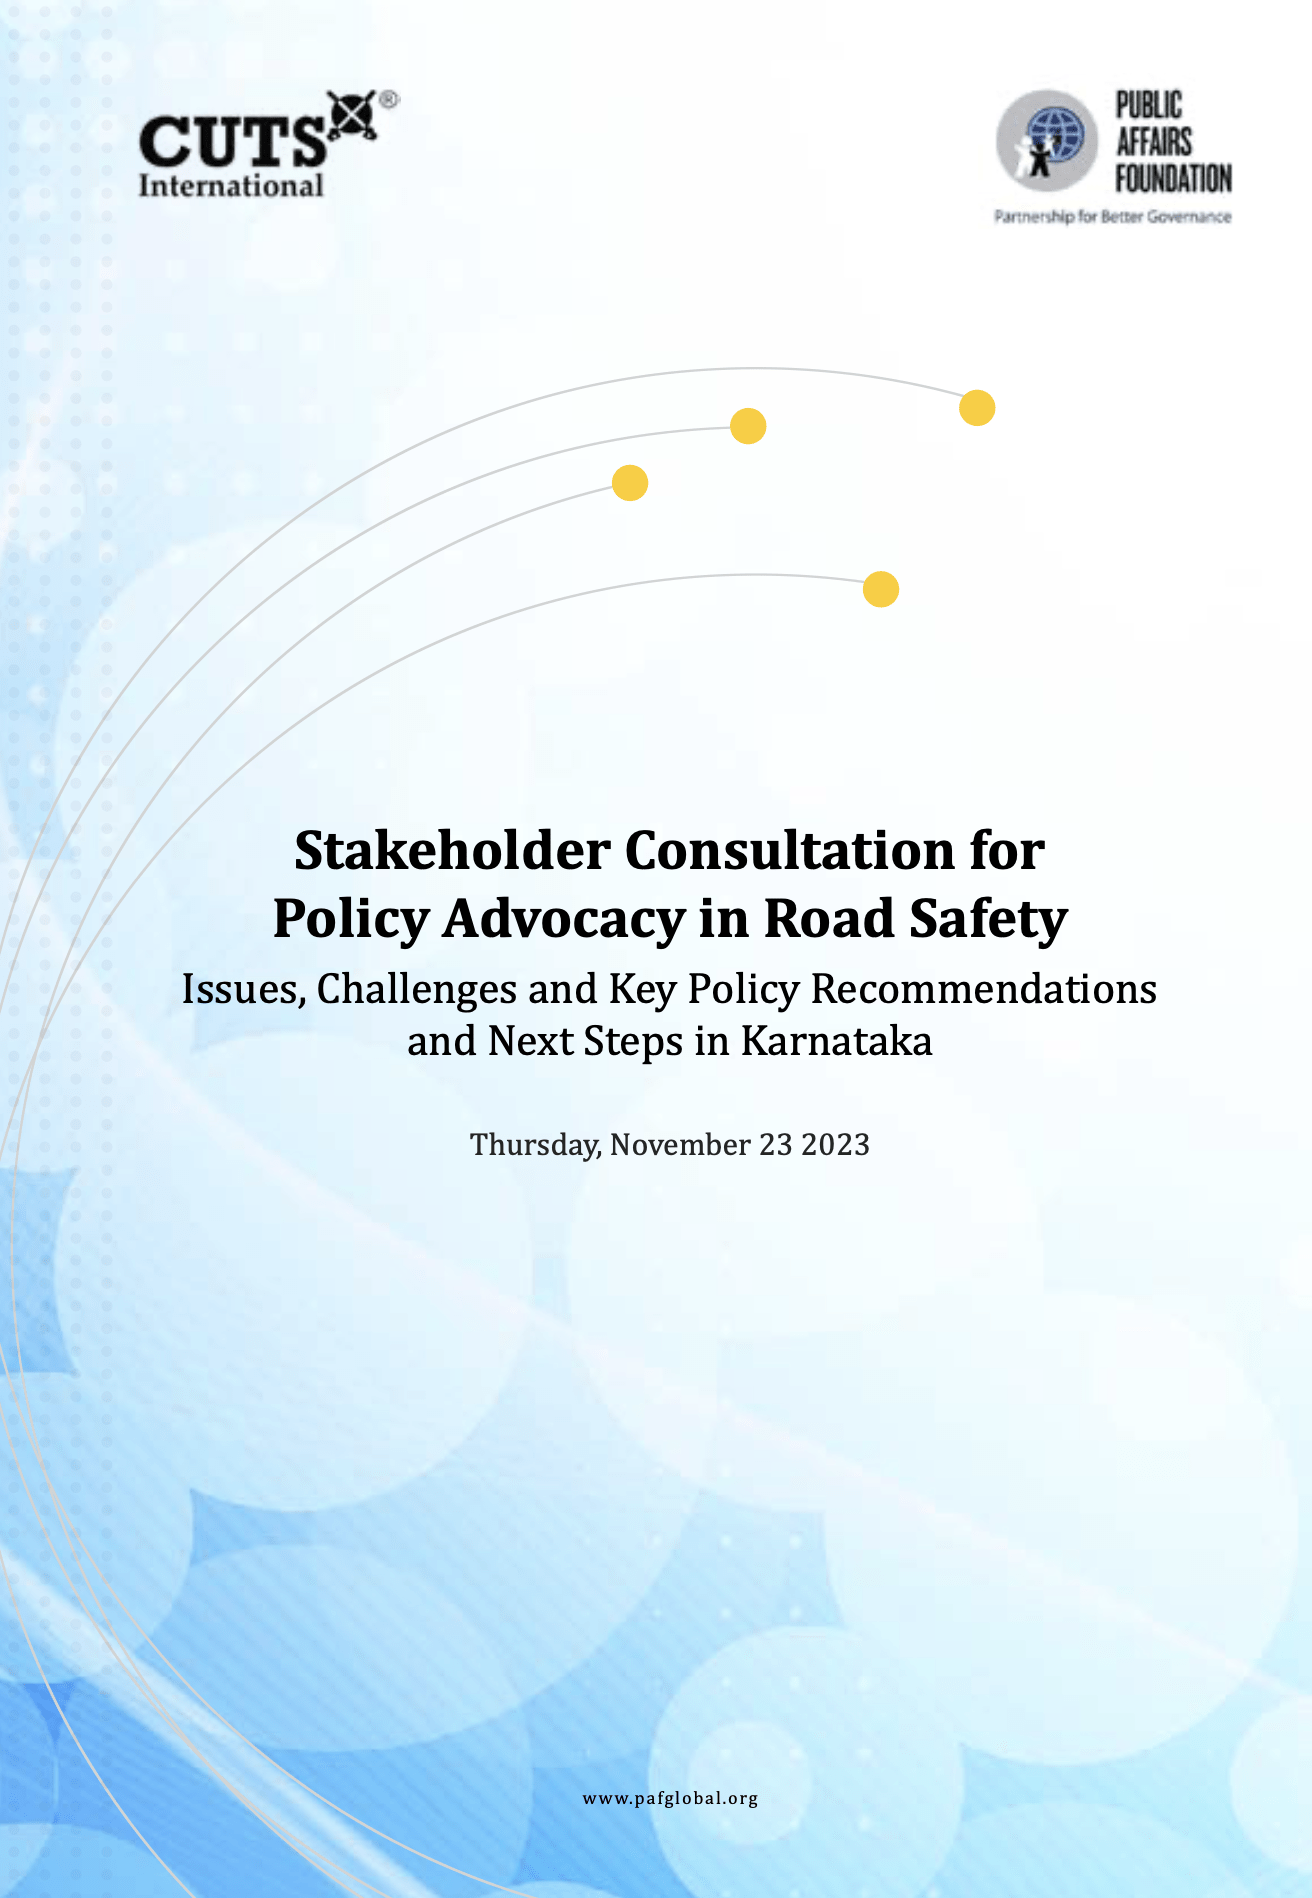 Stakeholder Consultation for Policy Advocacy in Road Safety